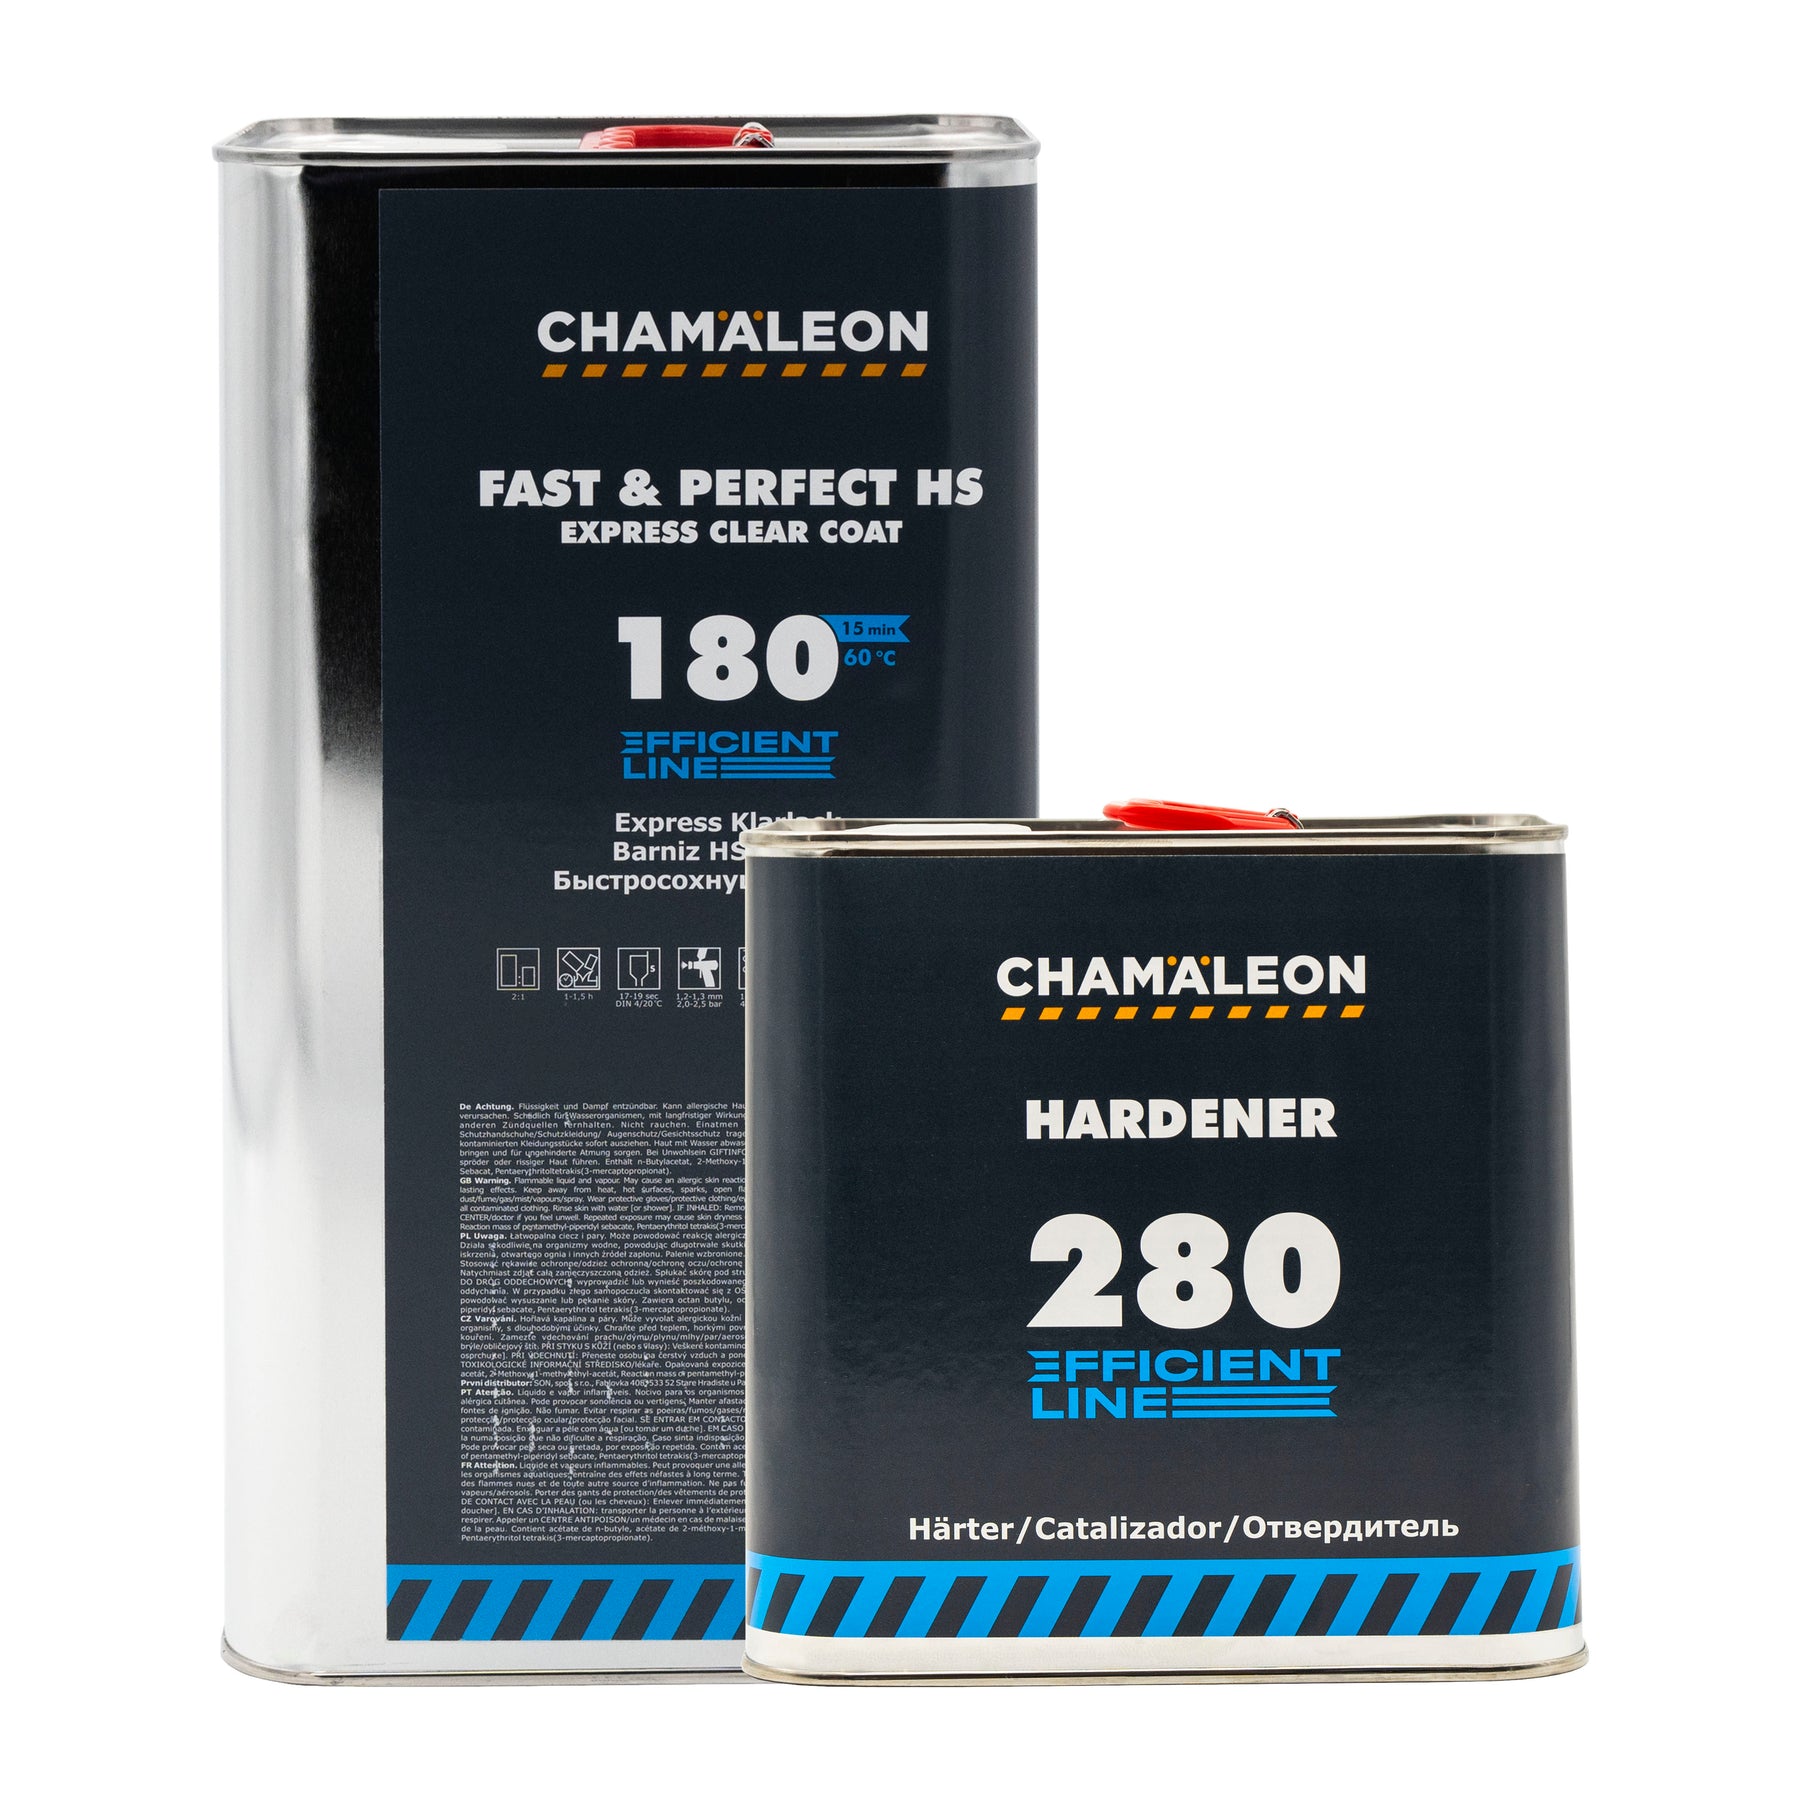 Chamaleon HS 2K Fast & Perfect Express Clear Coat 180 con catalizzatore